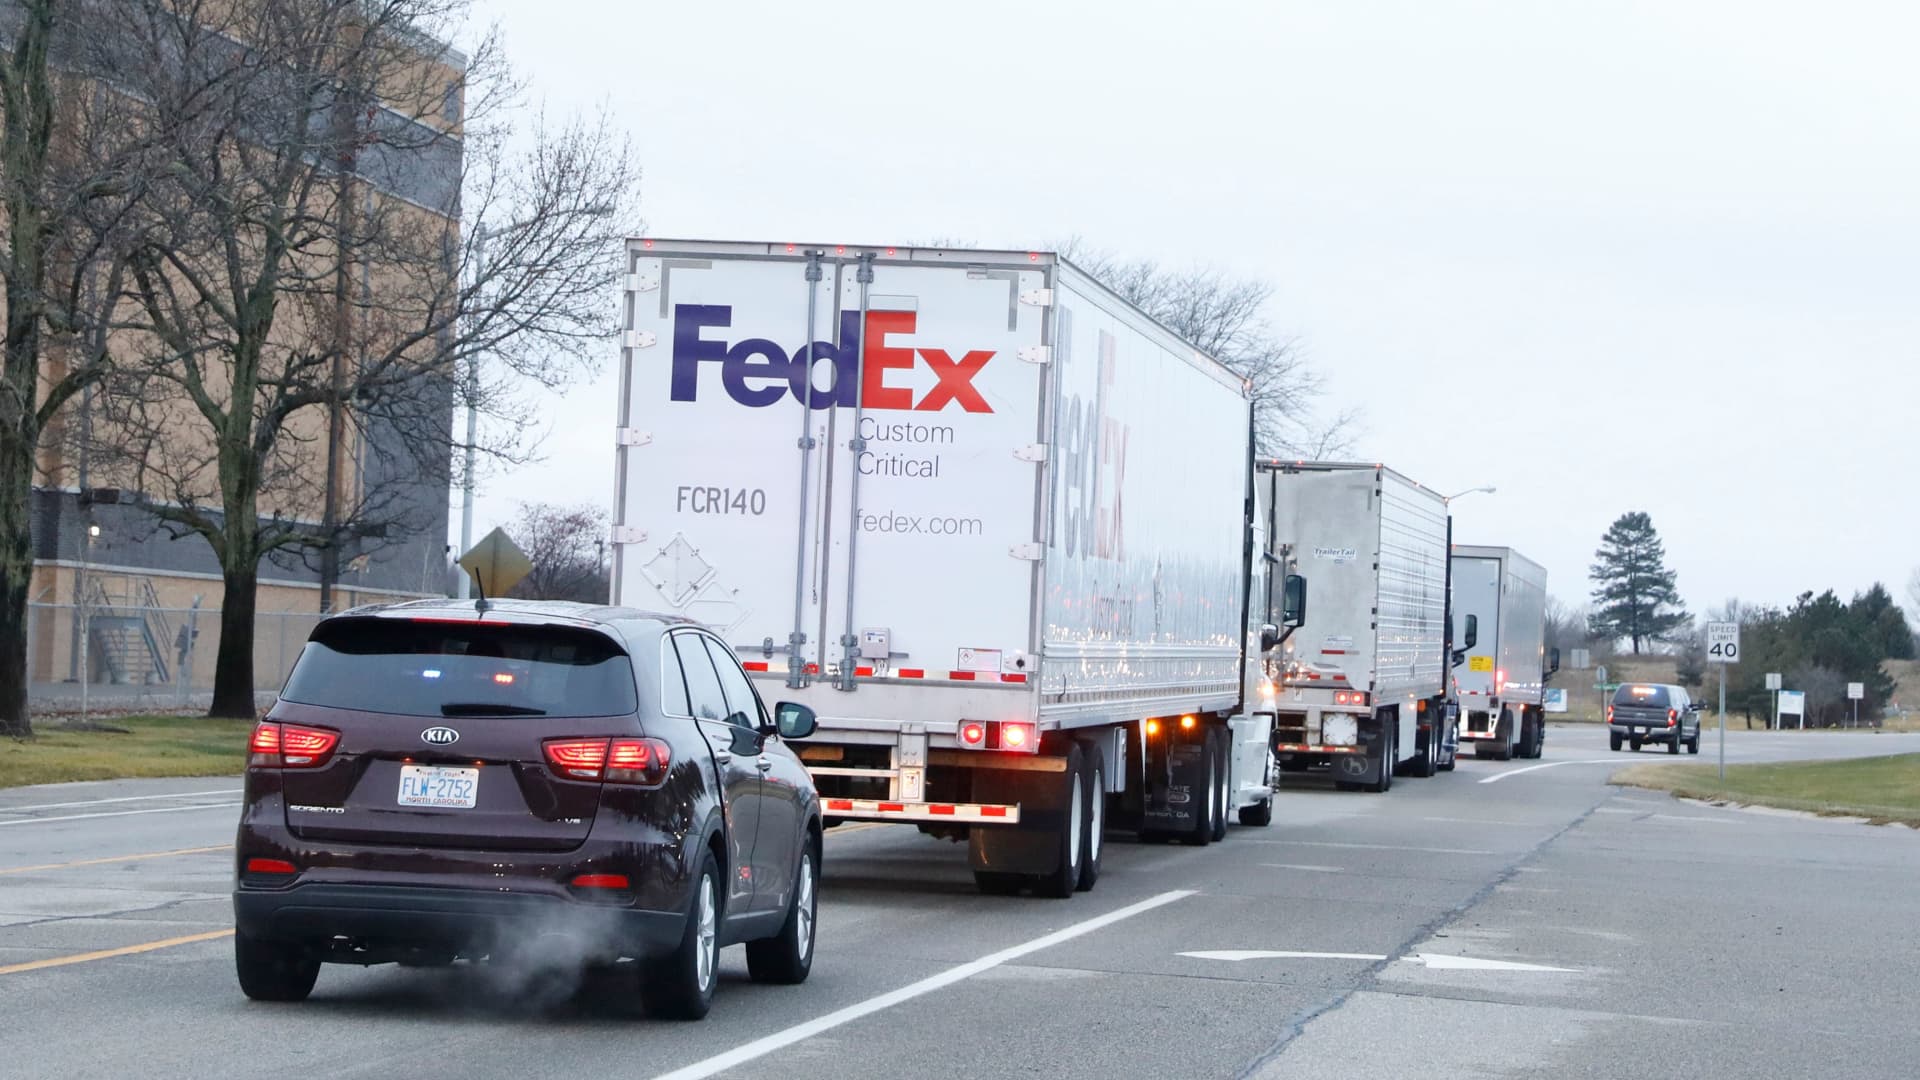 Trucks carrying the first shipment of the Covid-19 vaccine that is being escorted by the US Marshals Service, leave Pfizer's Global Supply facility in Kalamazoo, Michigan on December 13, 2020.